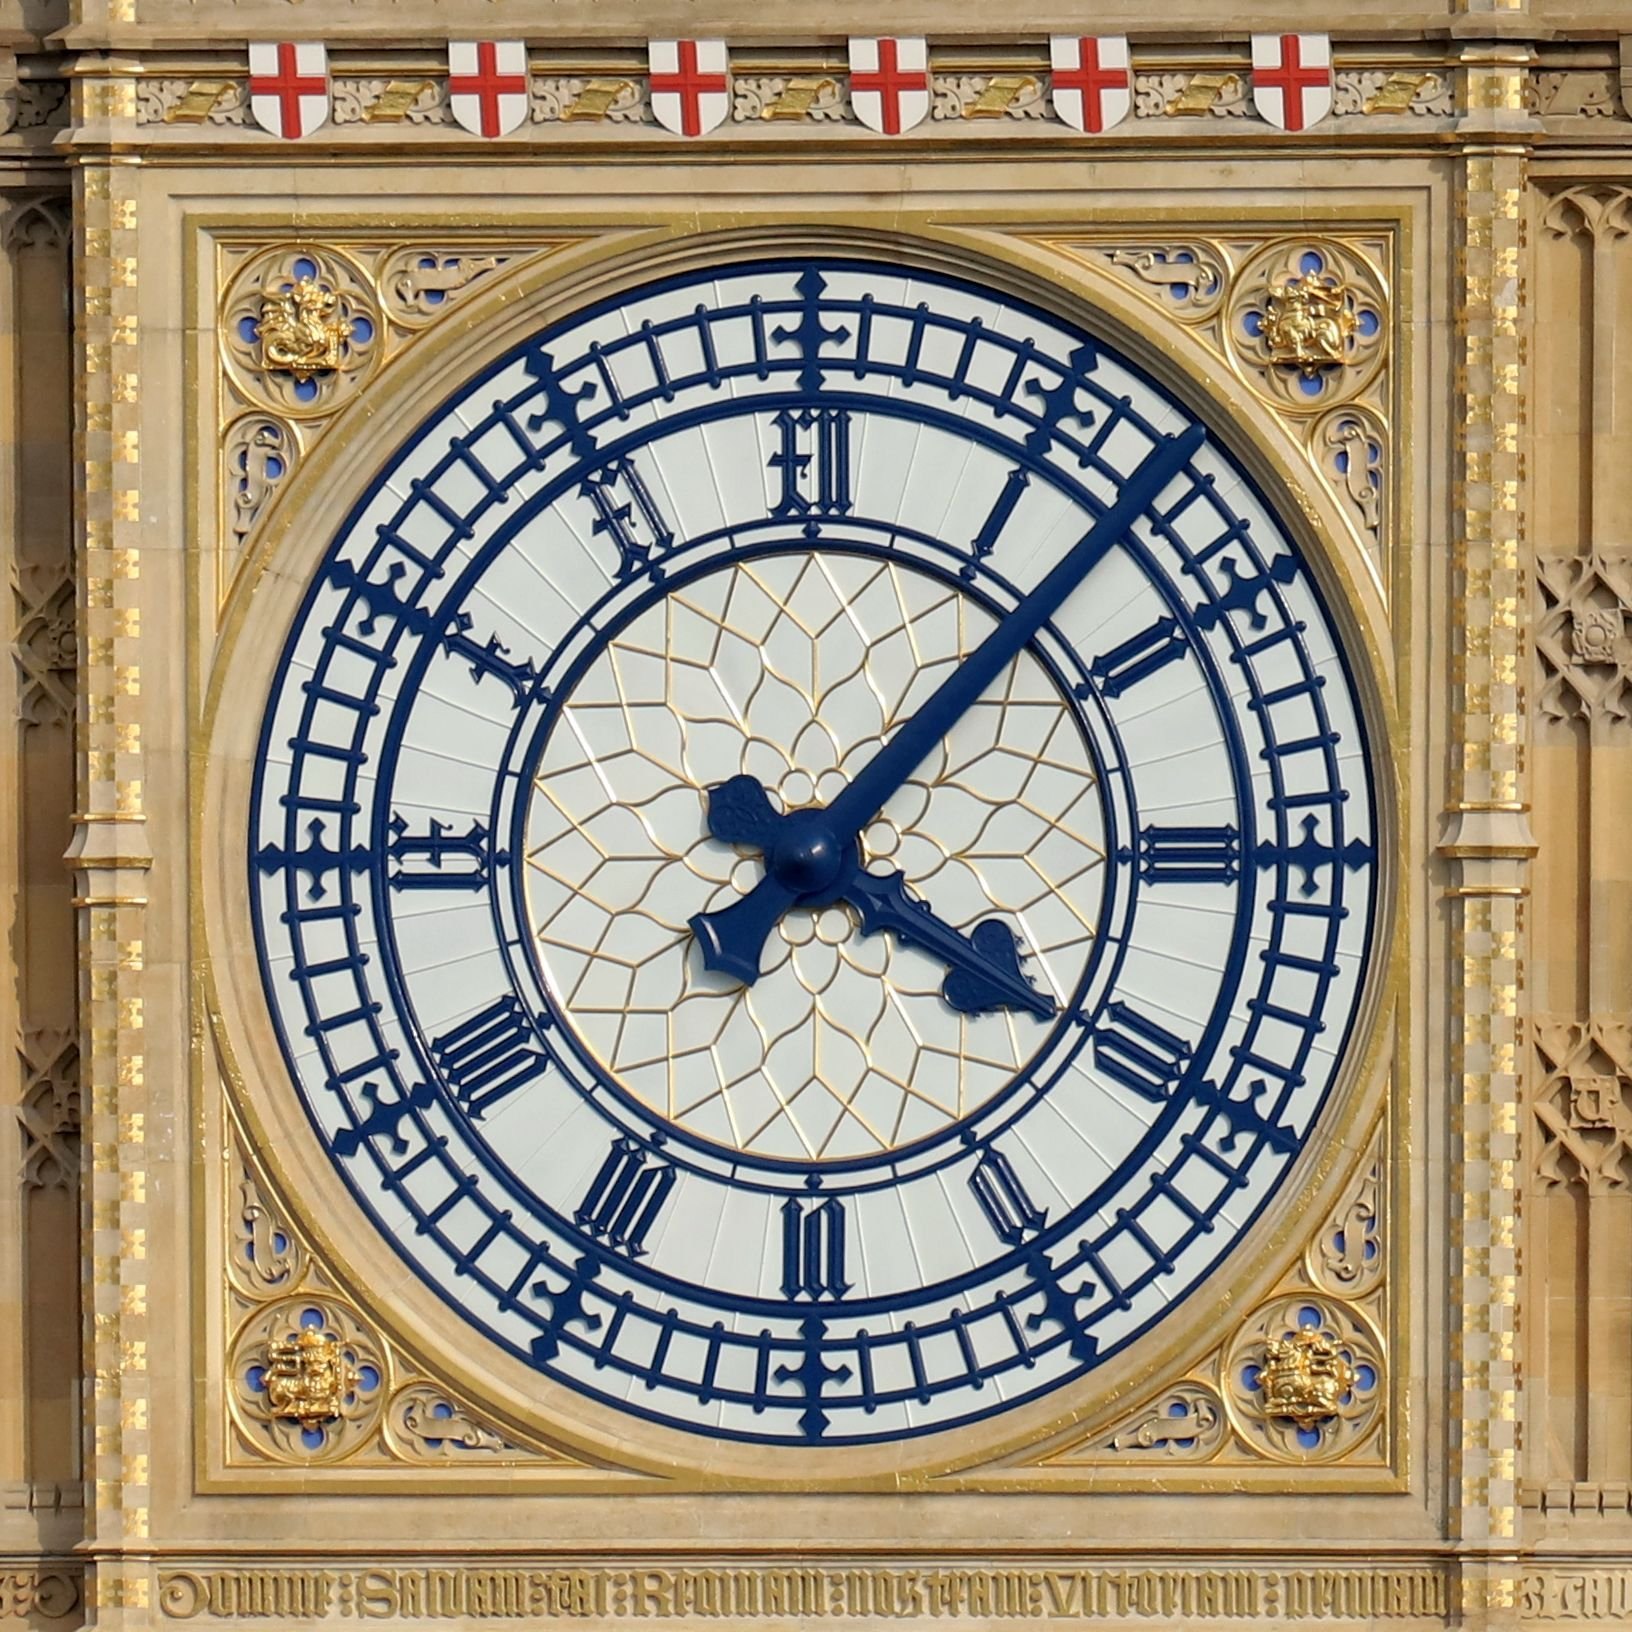 The West clock of the Elizabeth Tower, formerly known as the Clock Tower, at the Houses of Parliament and known by lots of people as Big Ben. View from the balcony of the dome on Methodist Central Hall. 17-Sep-2023.